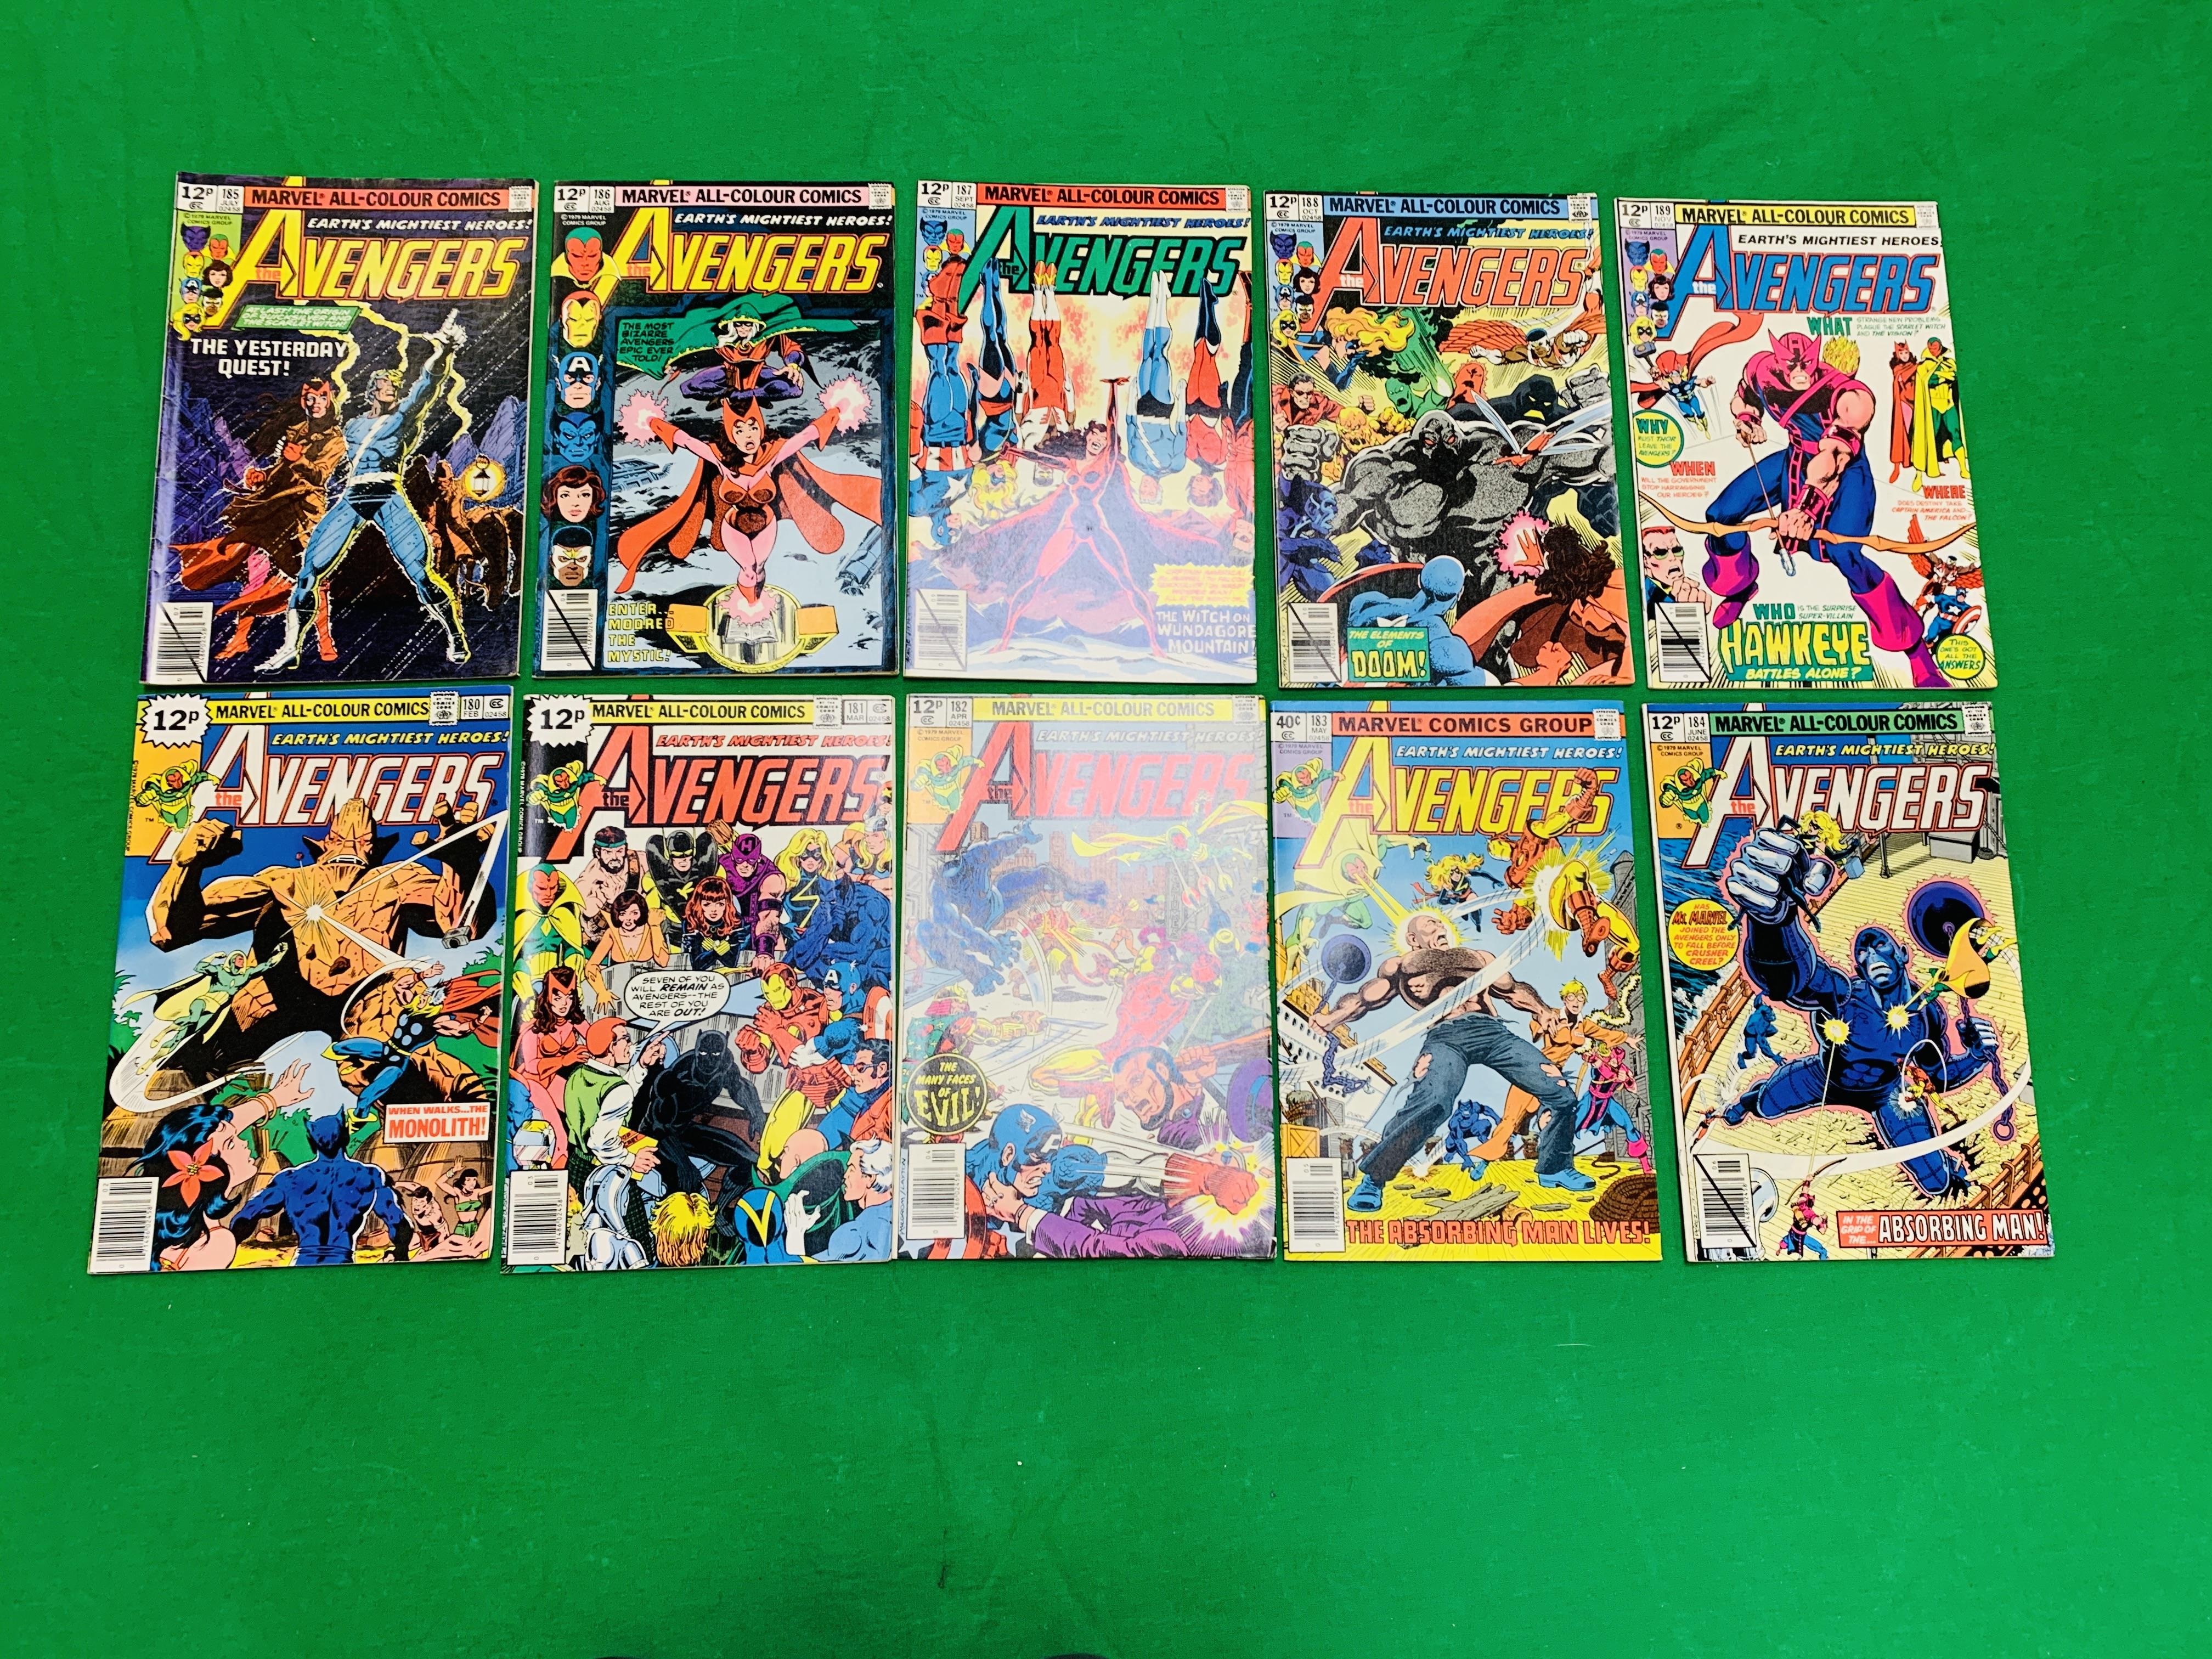 MARVEL COMICS THE AVENGERS NO. 101 - 299, MISSING ISSUES 103 AND 110. - Image 56 of 130